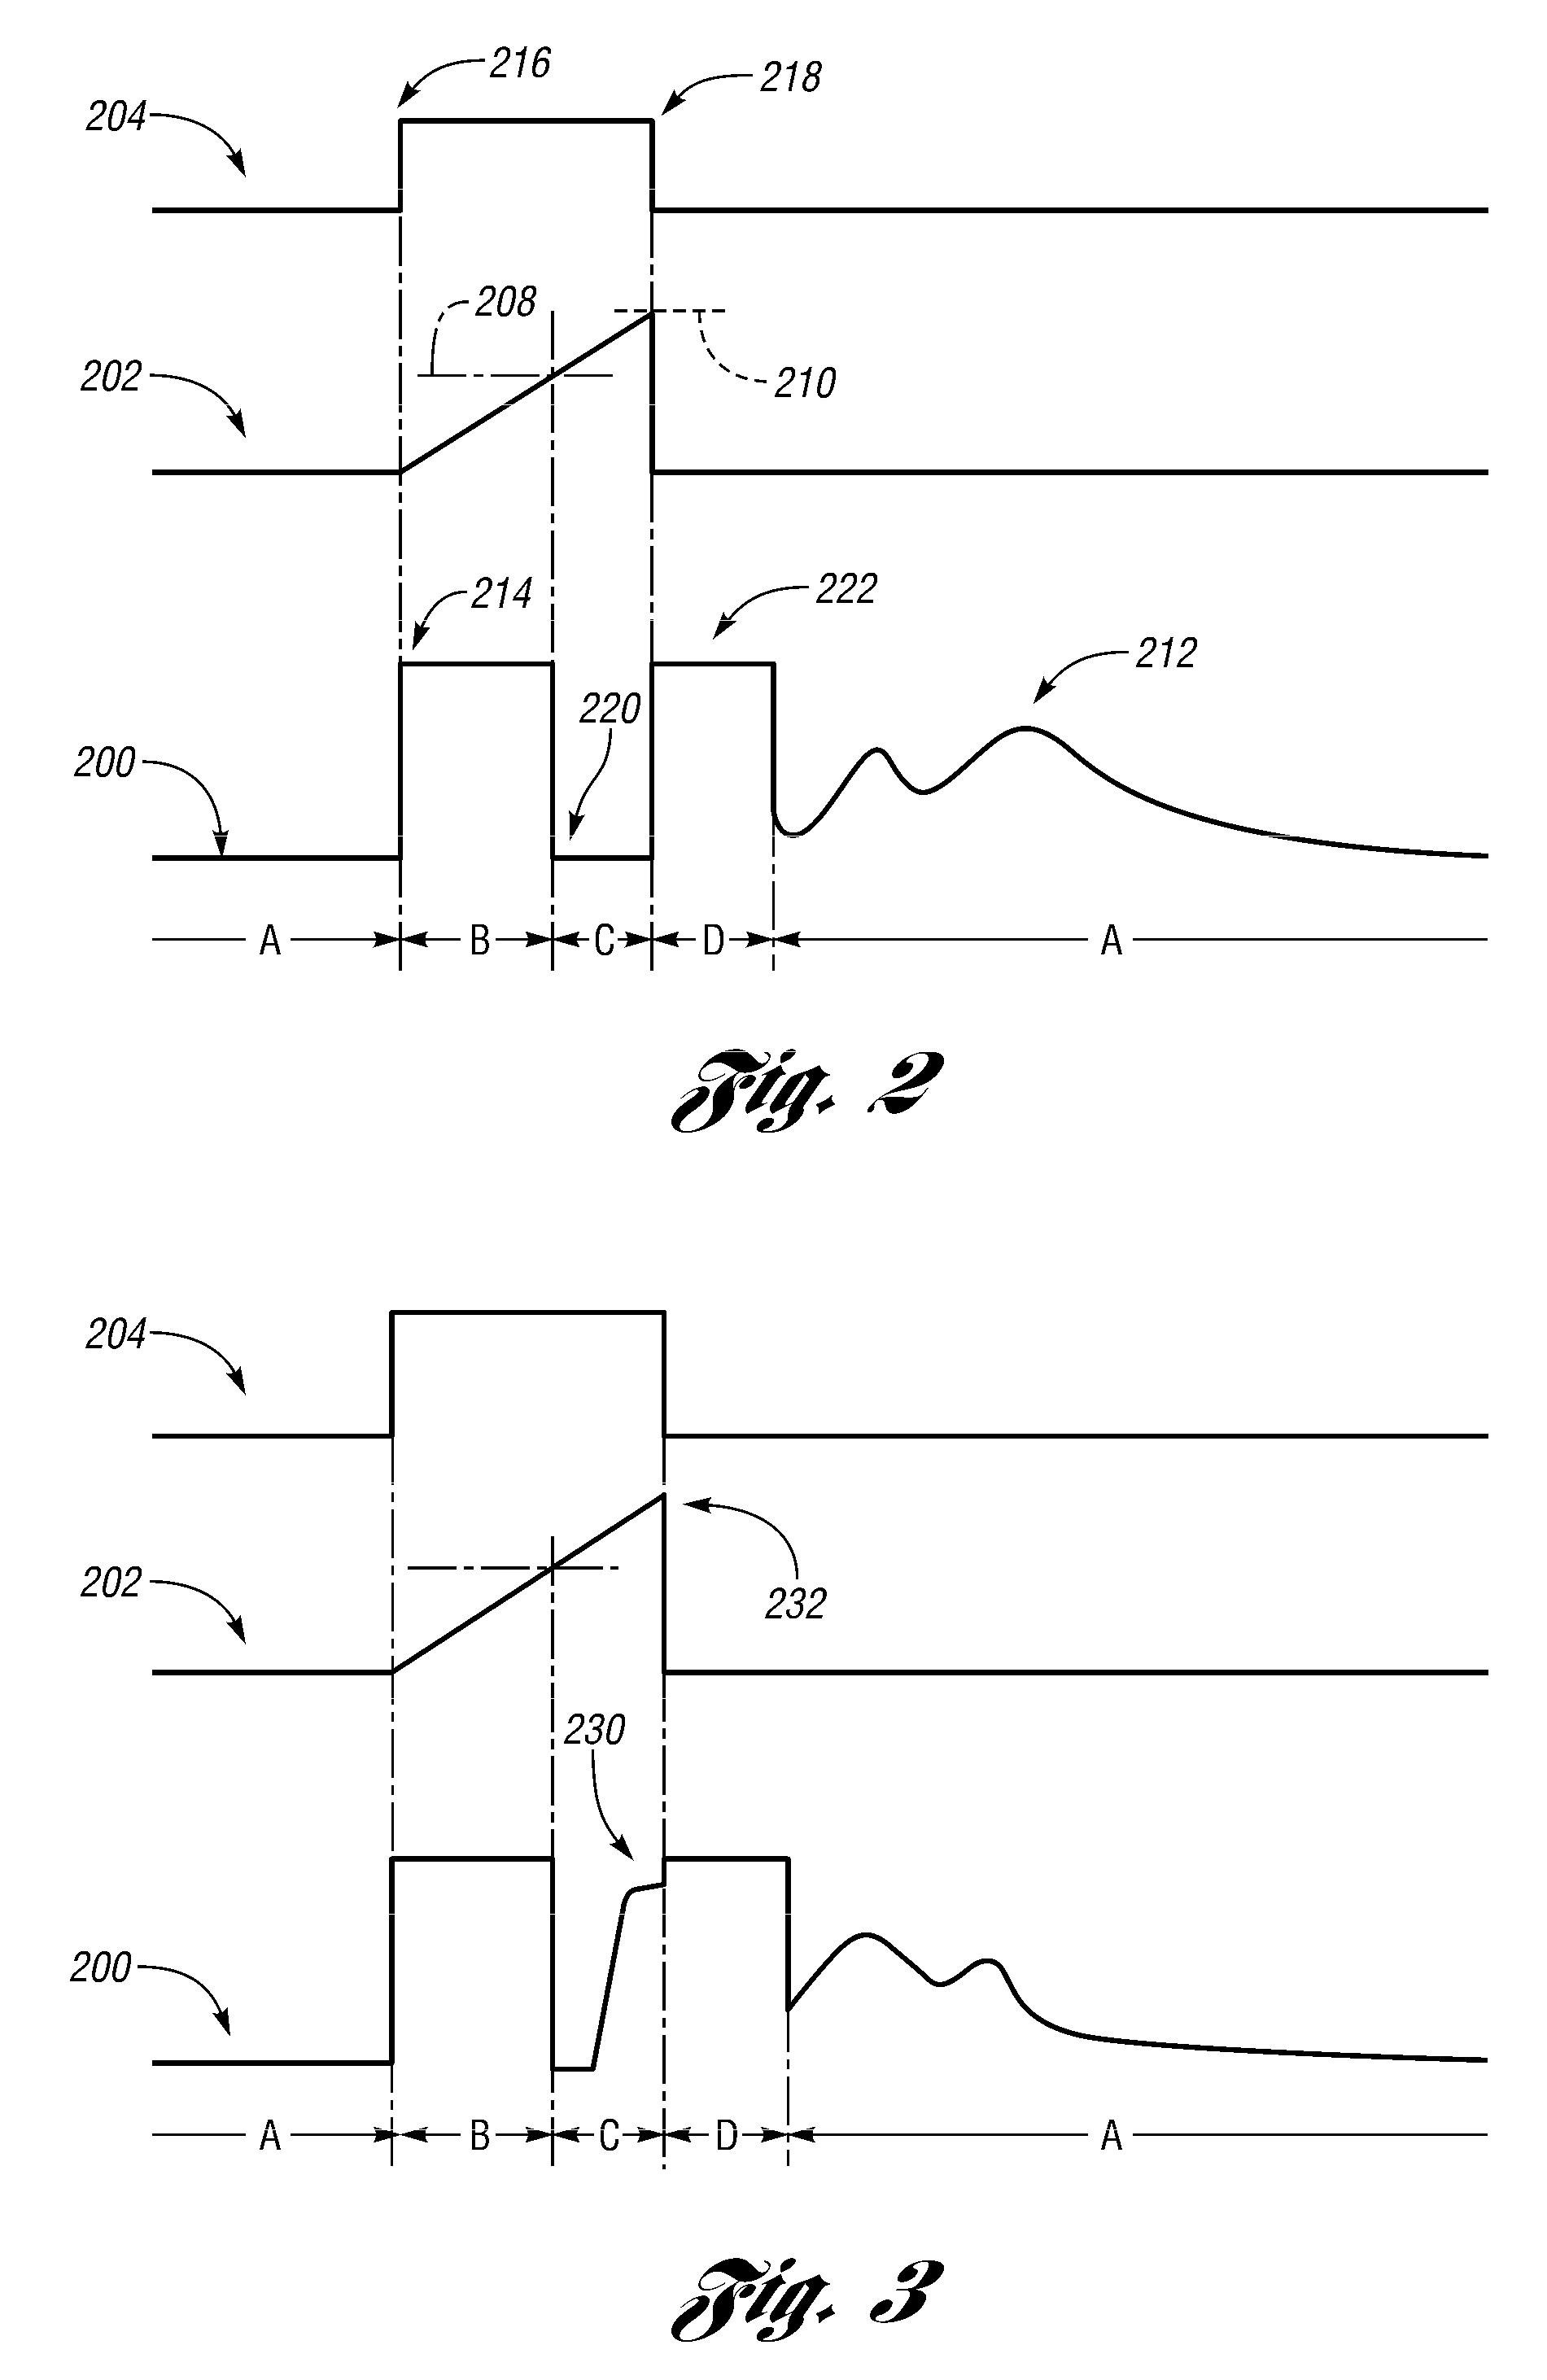 Ignition Coil With Ionization And Digital Feedback For An Internal Combustion Engine